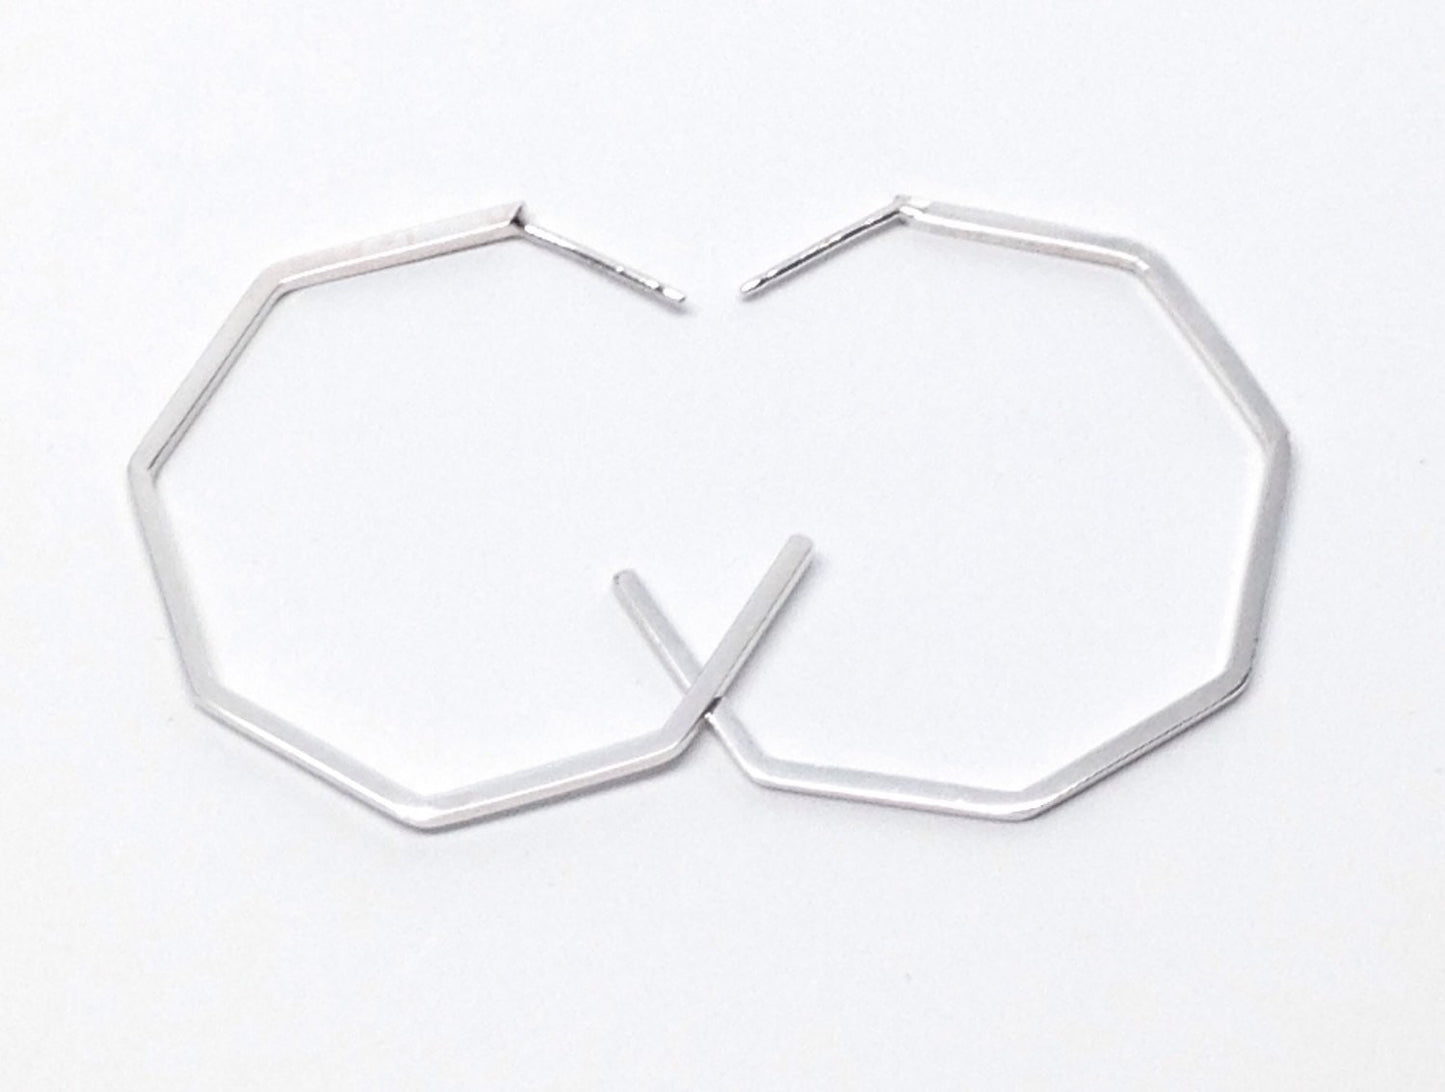 A pair of handmade sterling silver geometric hoop earrings on a white background